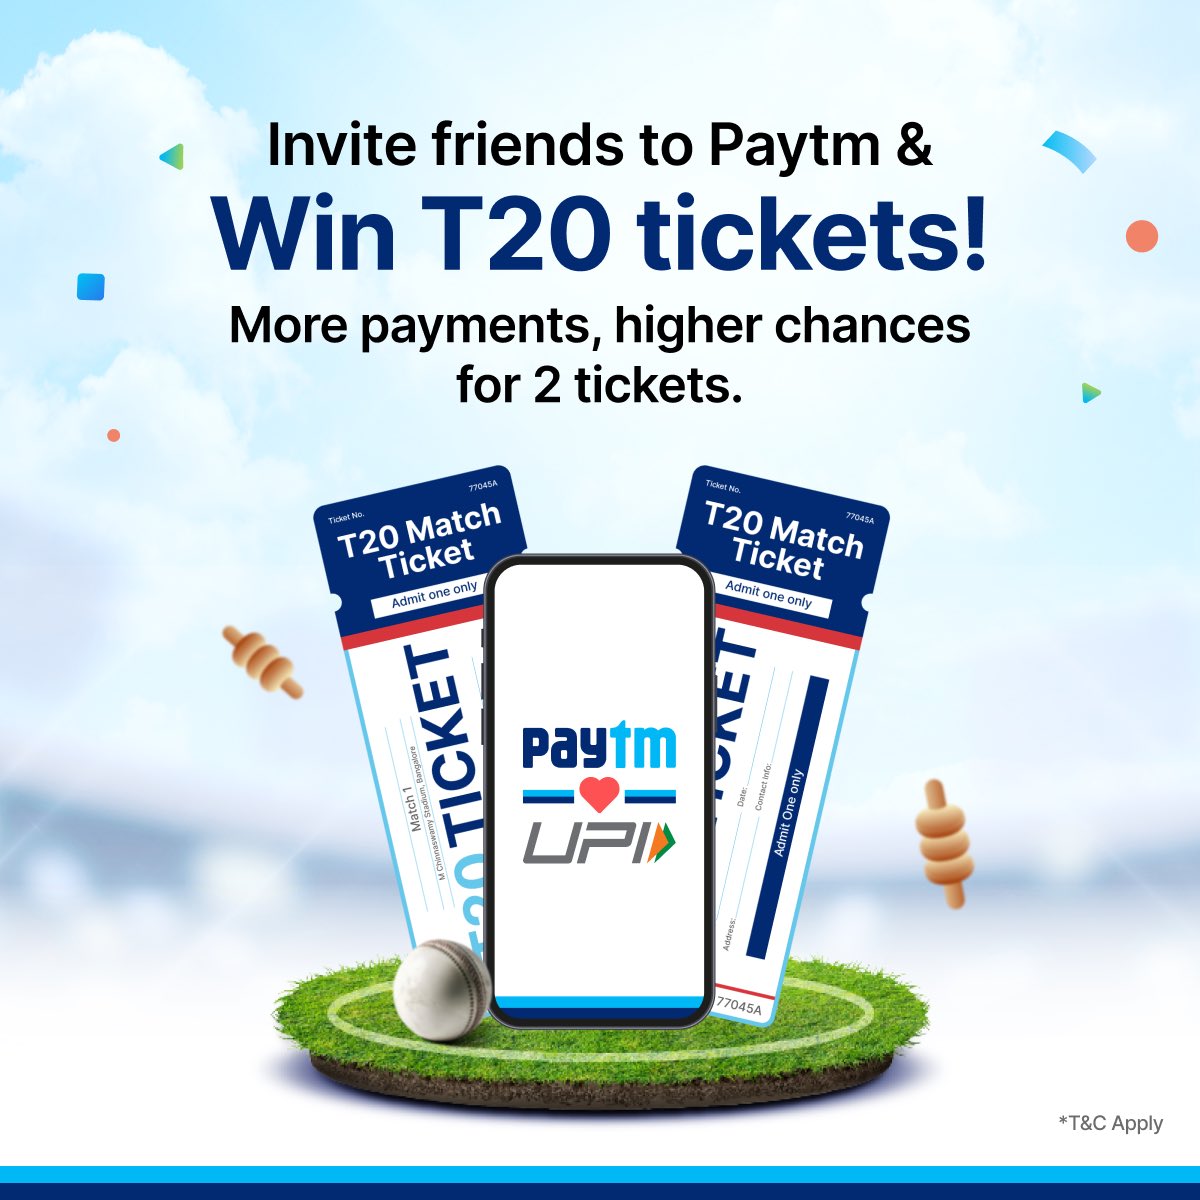 We heard your “YES” loud and clear! Get your friends on Paytm & win T20 tickets! Cheer LIVE from the stands at Hyderabad & Ahmedabad! 🏏 

Dive into the action! Refer now: m.paytm.me/T20Ticket 

#T20WithPaytm #PaytmUPI #PaytmKaro